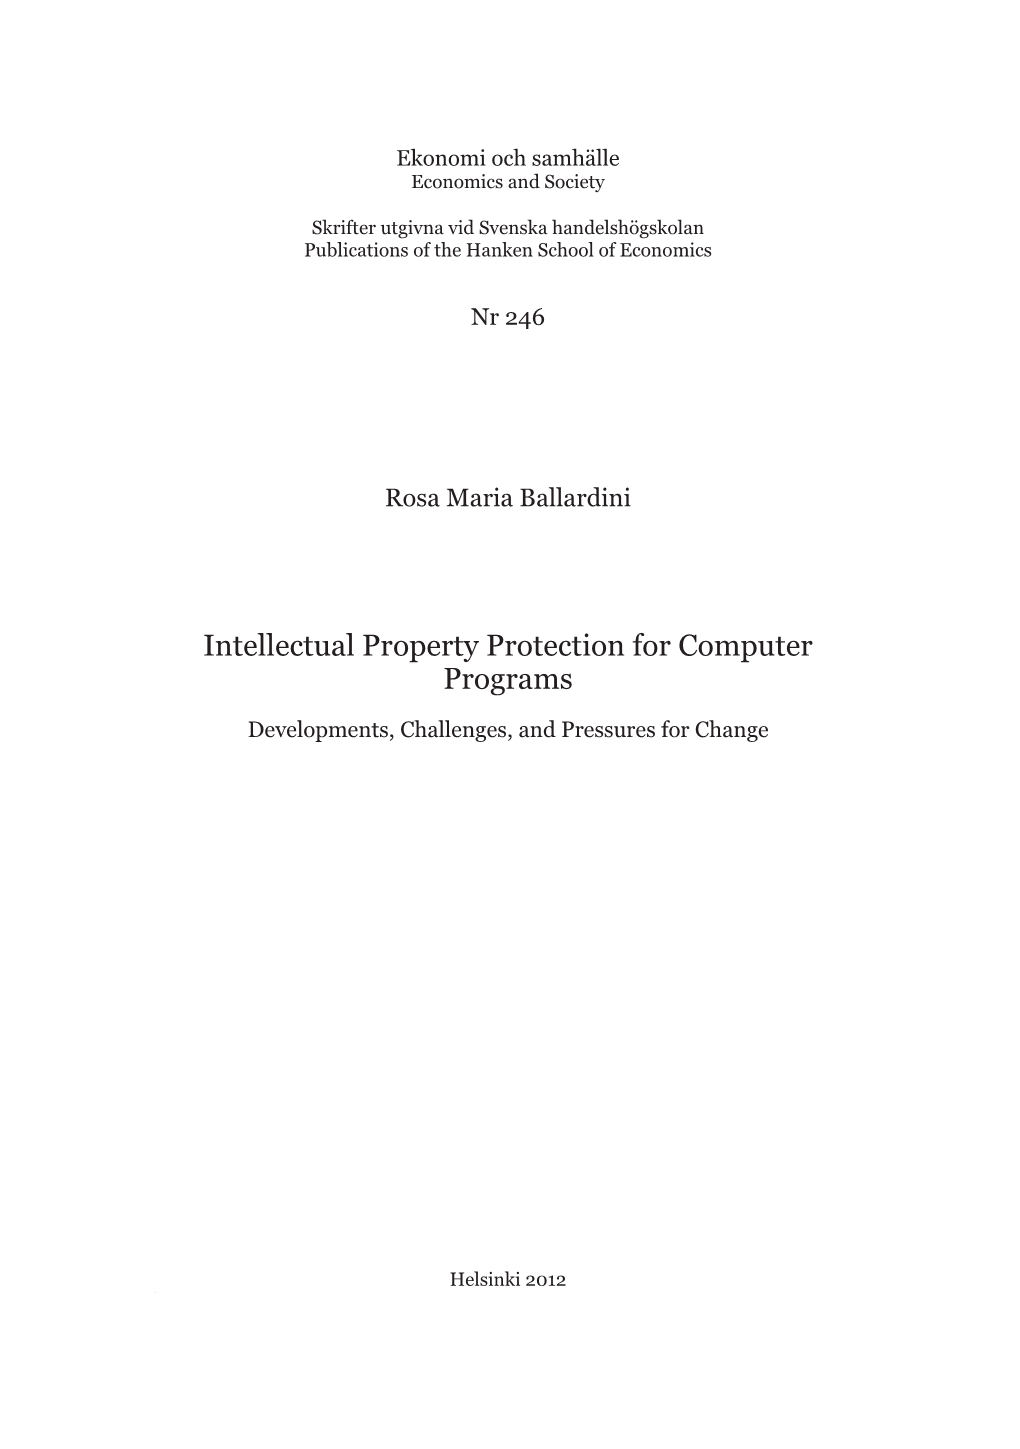 Intellectual Property Protection for Computer Programs